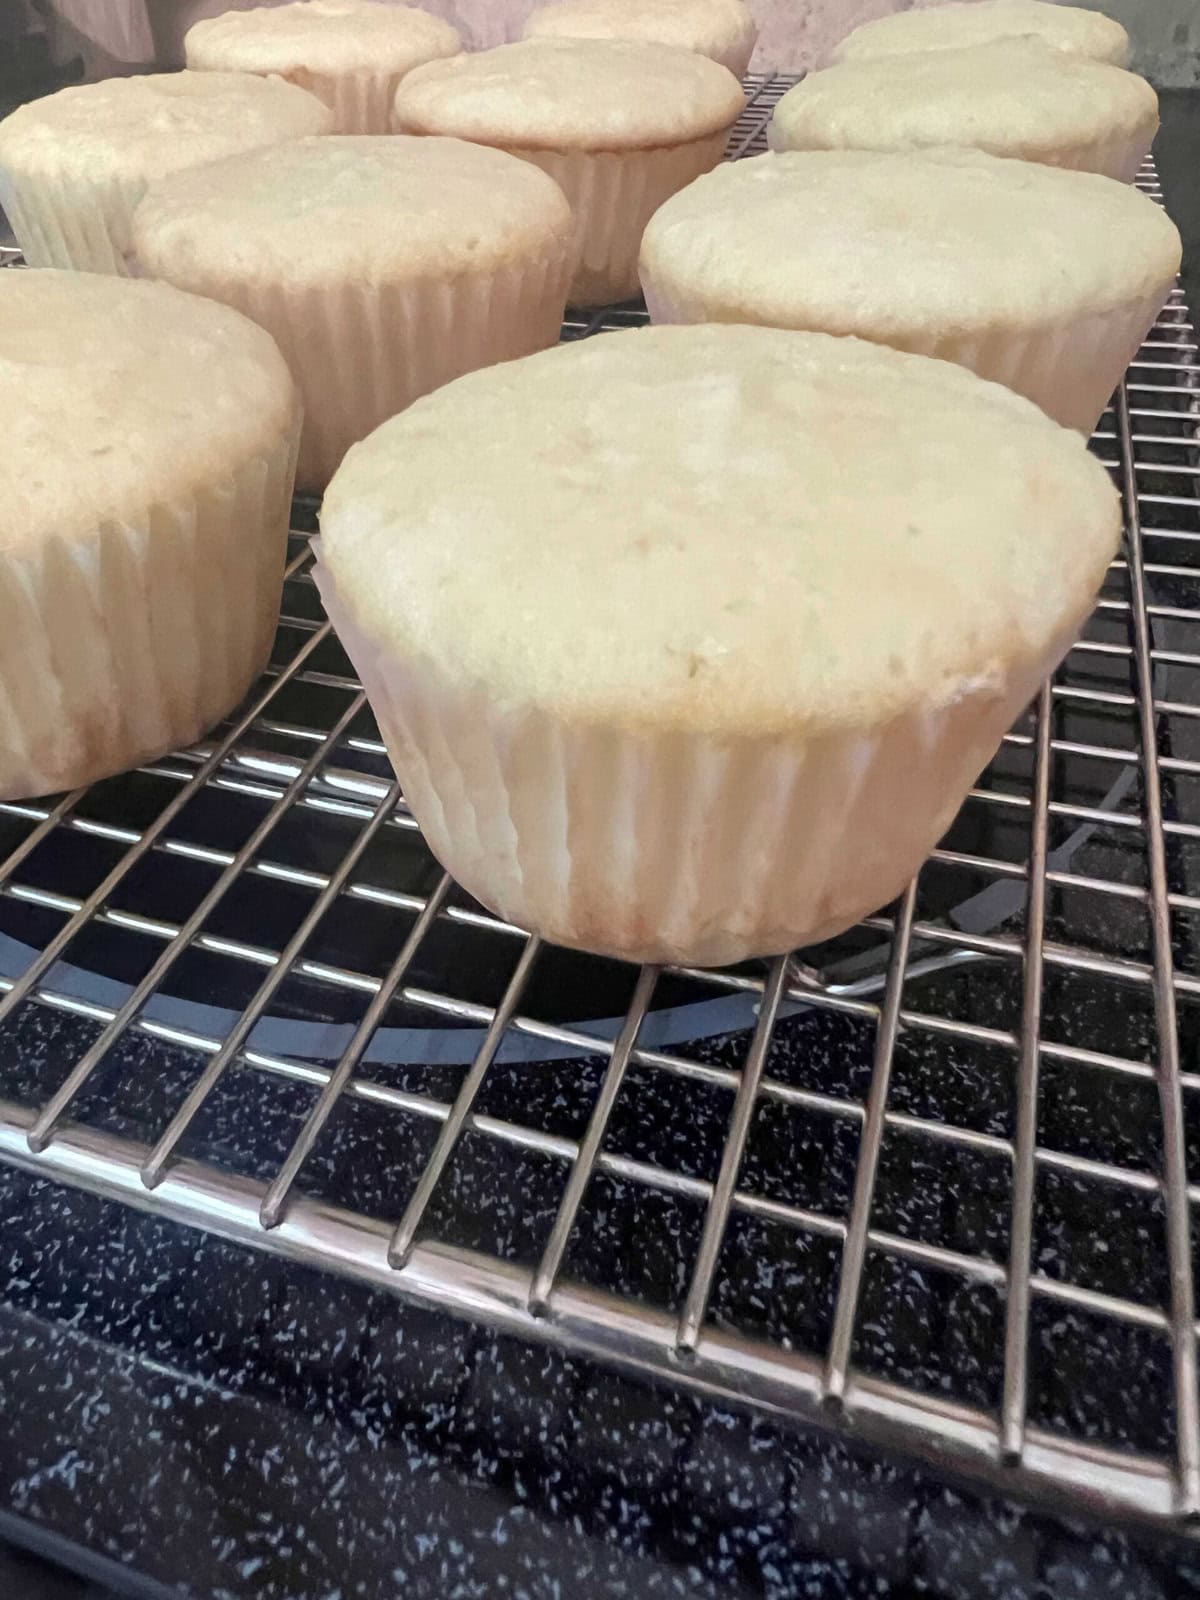 Coconut Cupcakes, cooling on a wire rack.